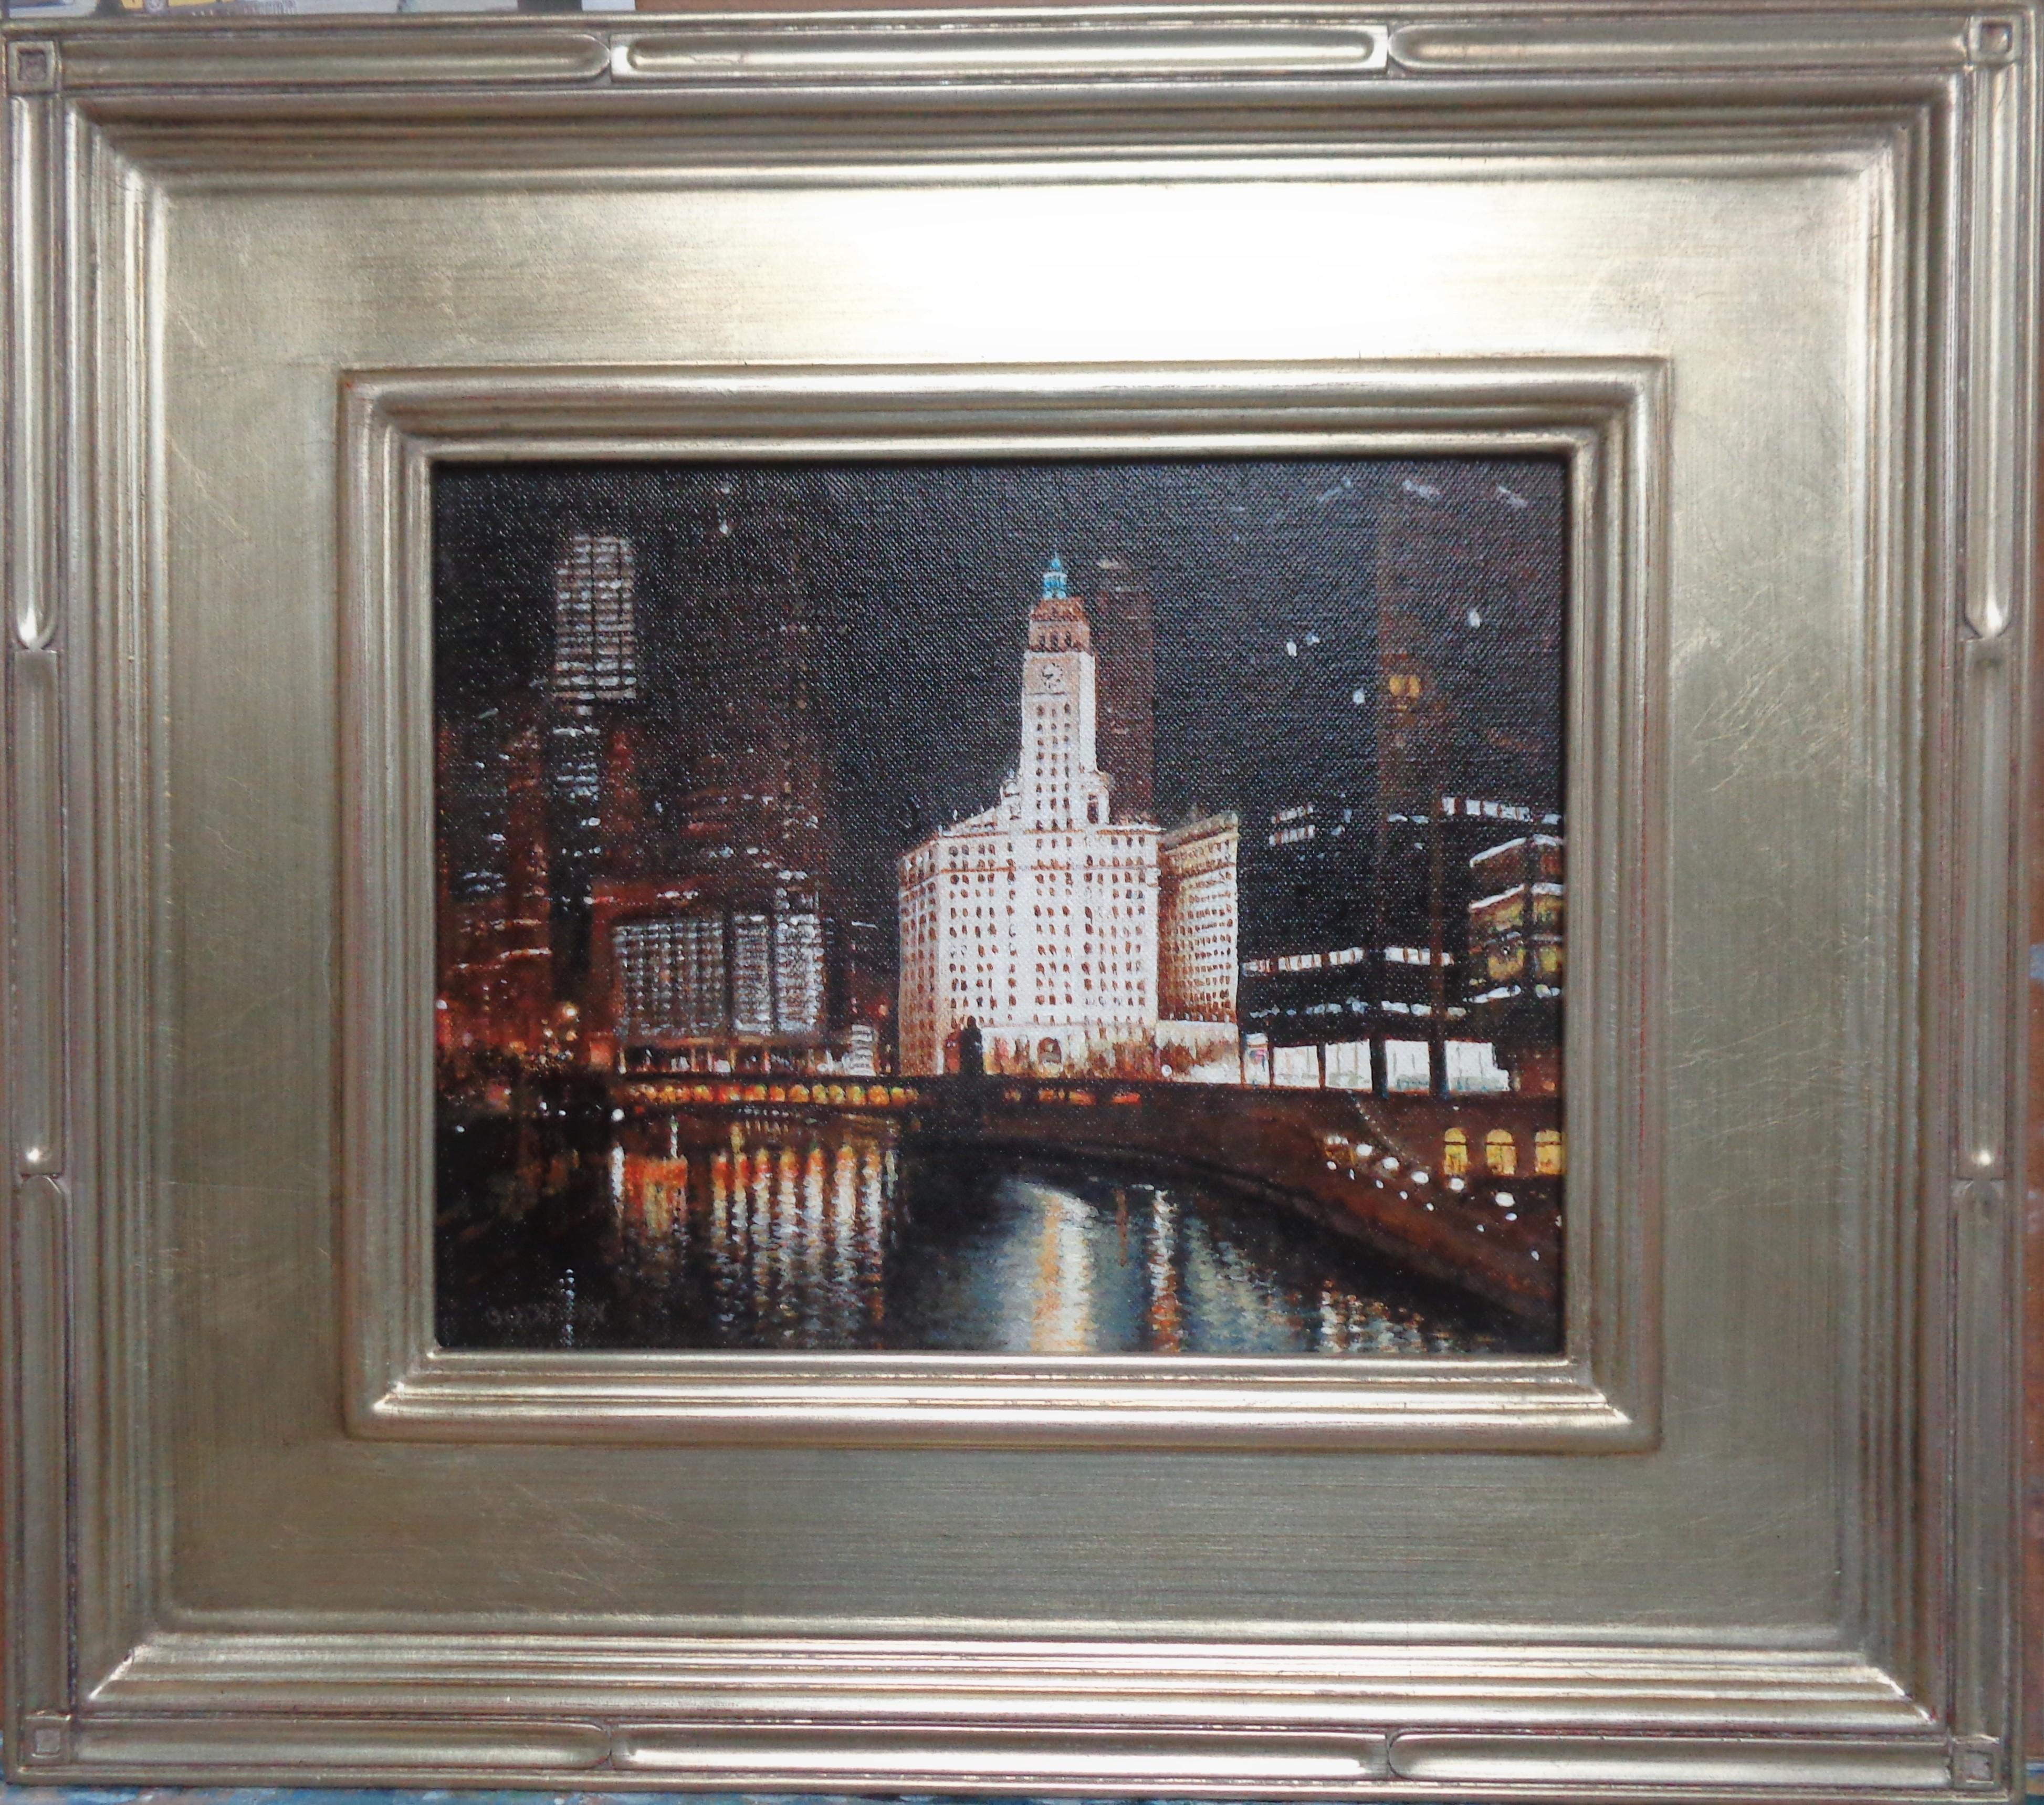  Along the Chicago River, Wrigley Clock Tower is an oil painting on canvas panel by award winning contemporary artist Michael Budden that showcases a beautiful evening on the Chicago River with the Clock Tower all lit up and reflections in the